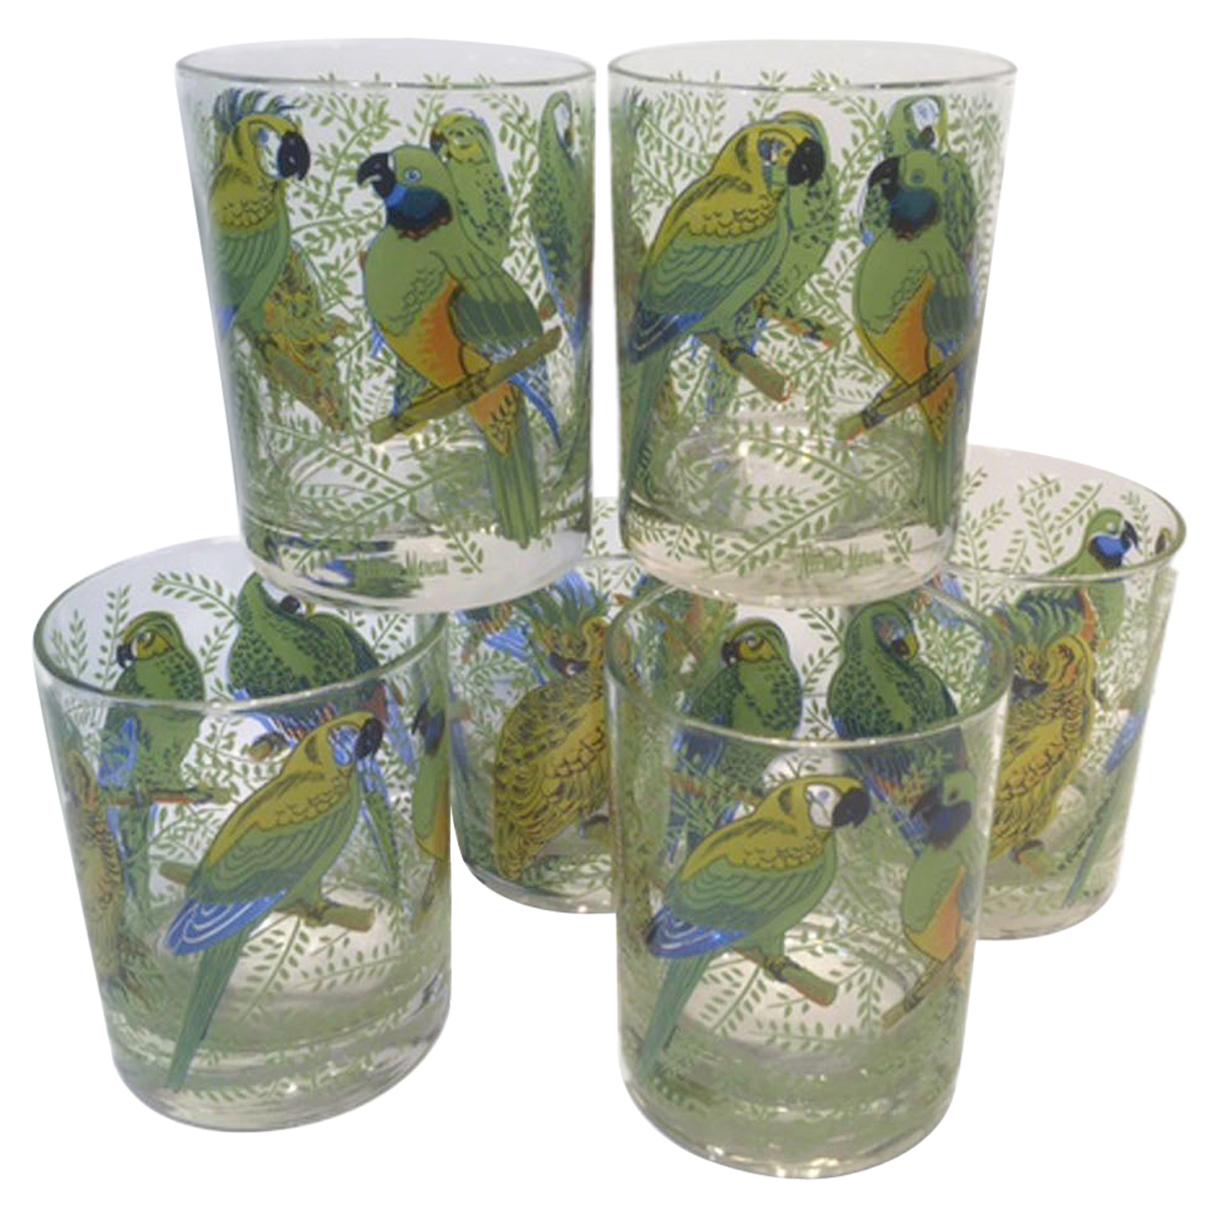 https://a.1stdibscdn.com/6-vintage-cocktail-glasses-w-parrots-in-foliage-marked-neiman-marcus-for-sale/1121189/f_228576921615416980314/22857692_master.jpg